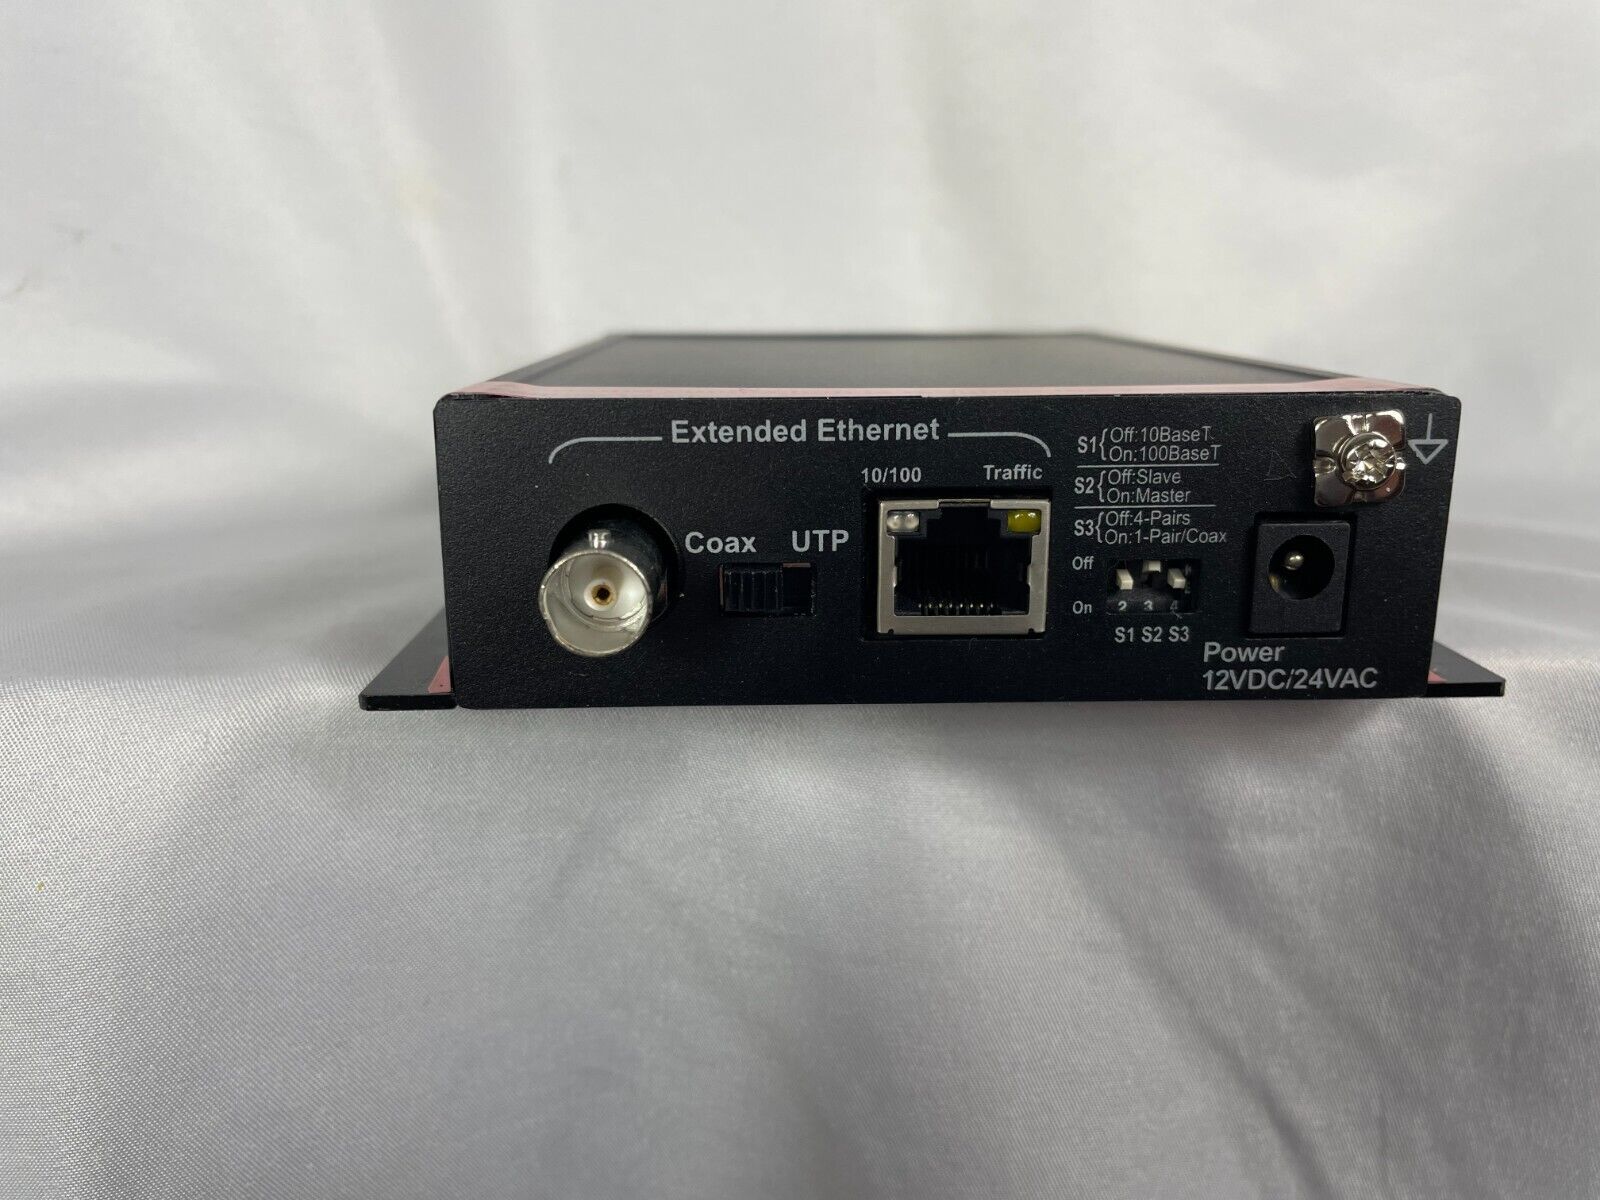 Comnet 4 port ethernet switch CLFE4US1TPC missing power cord